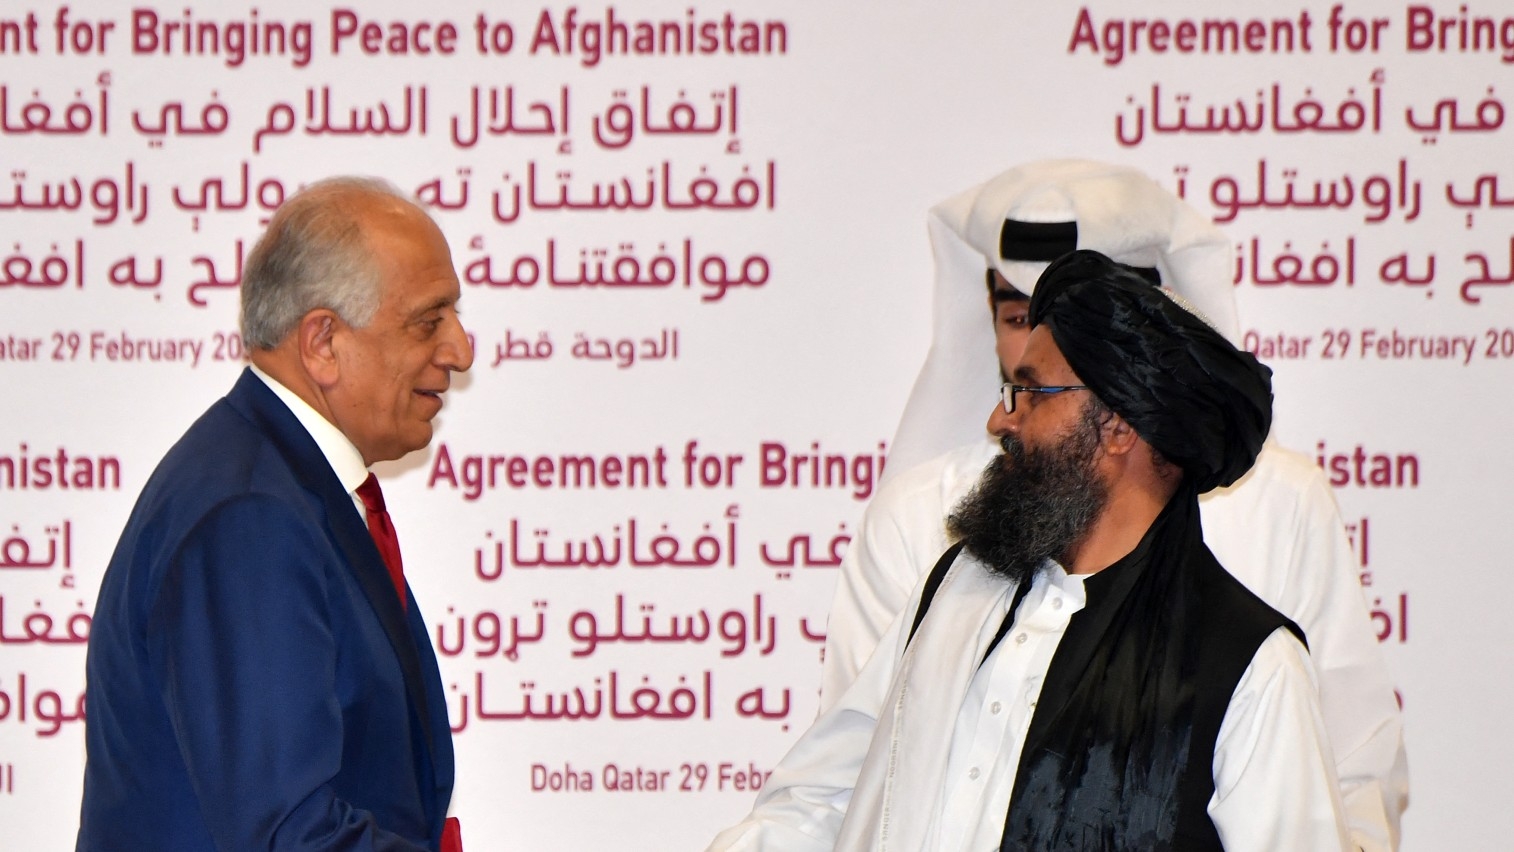 US envoy to Afghanistan Zalmay Khalilzad and Taliban co-founder Mullah Abdul Ghani Baradar shake hands after signing a peace agreement in Doha on 29 February 2020.